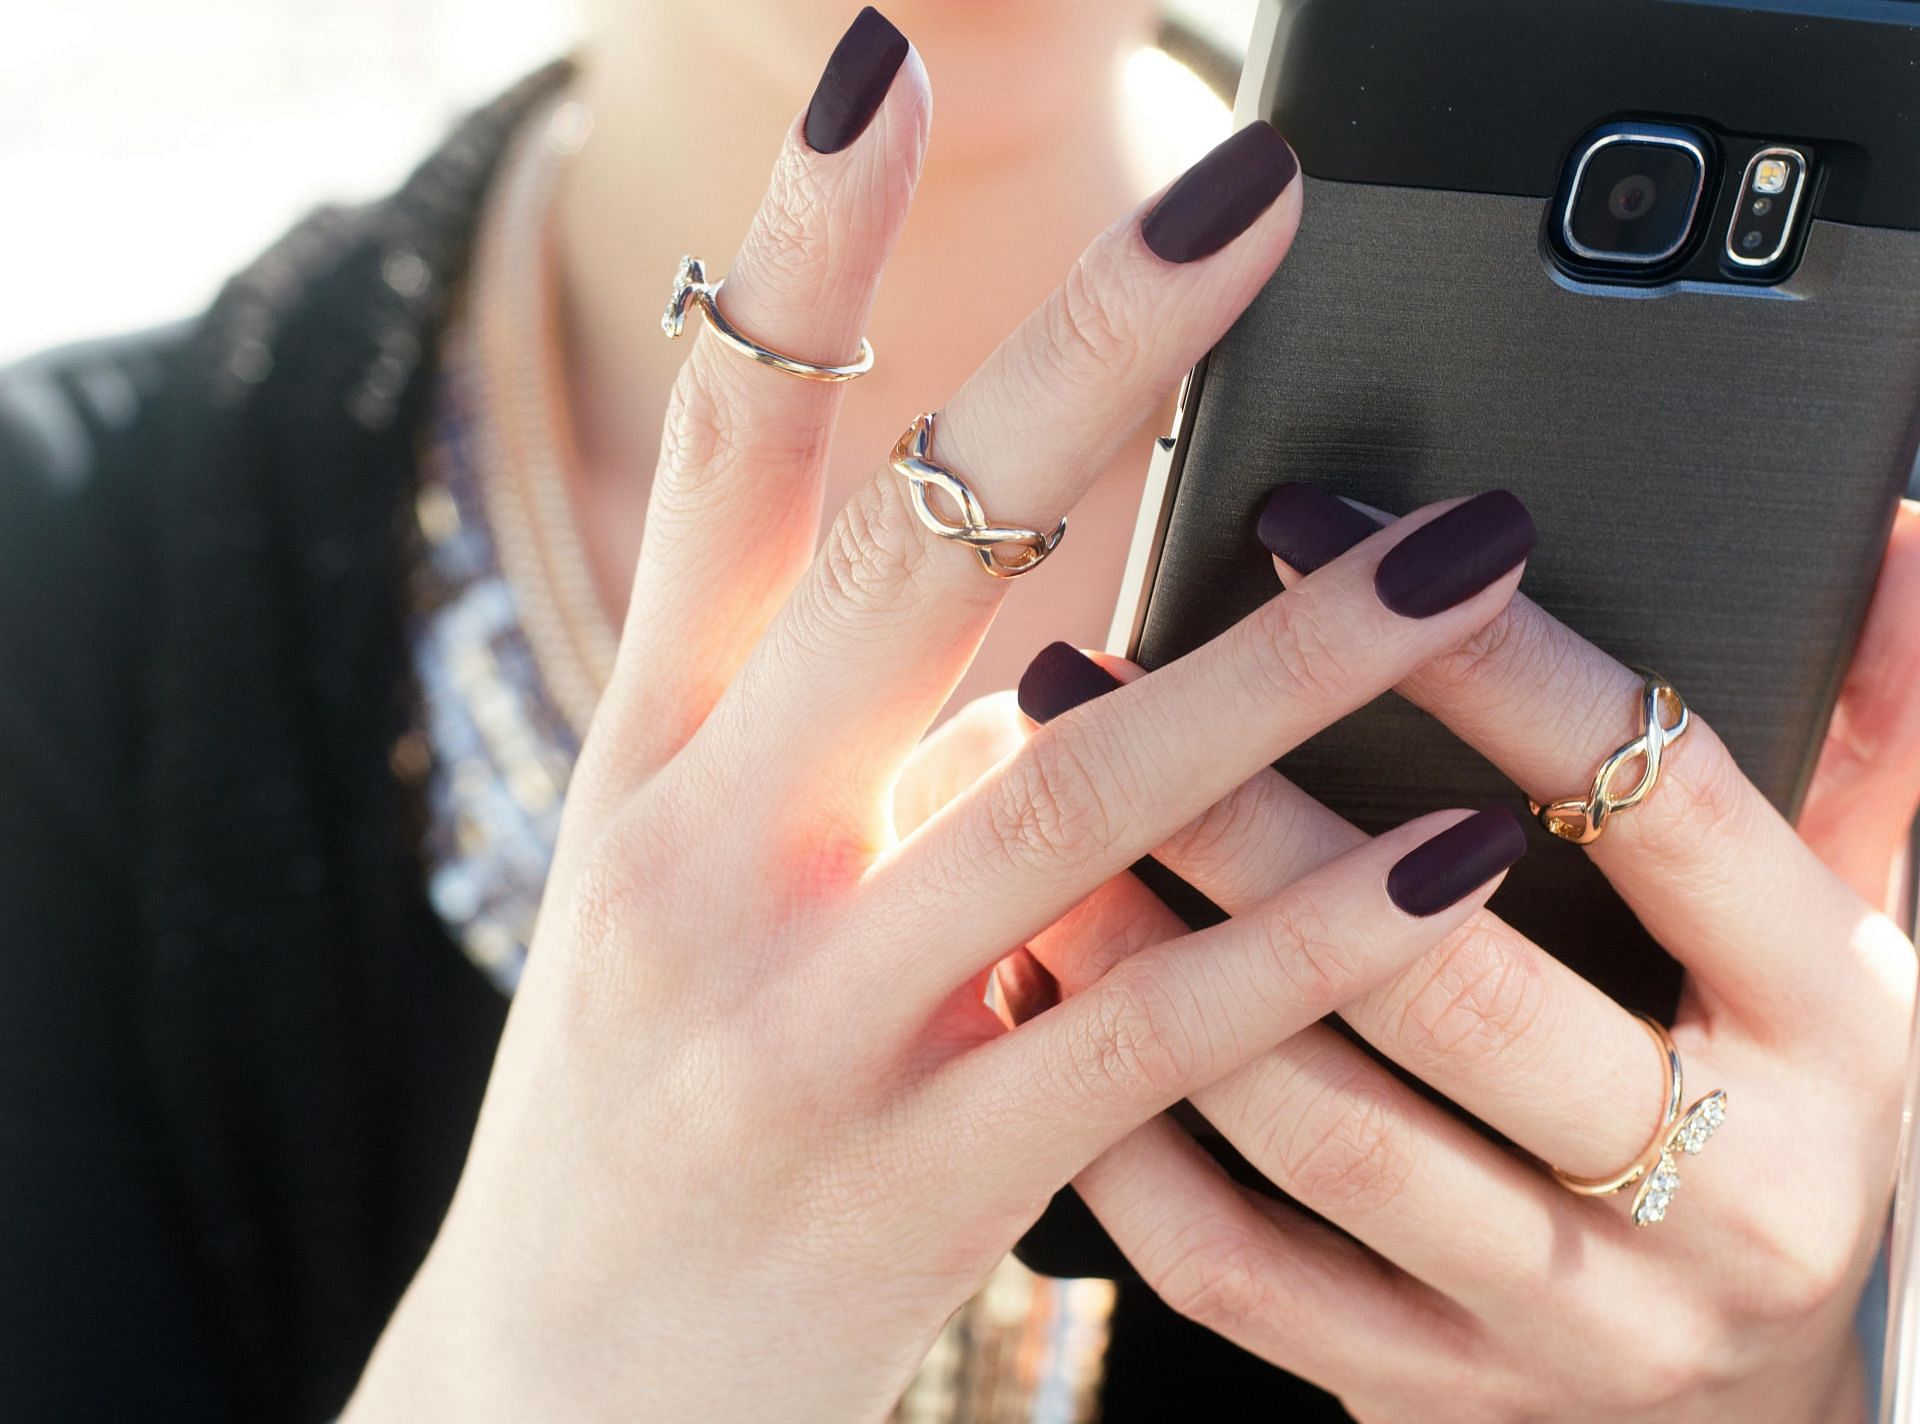 tips to stop picking nails for good (image sourced via Pexels / Photo by adrienne)